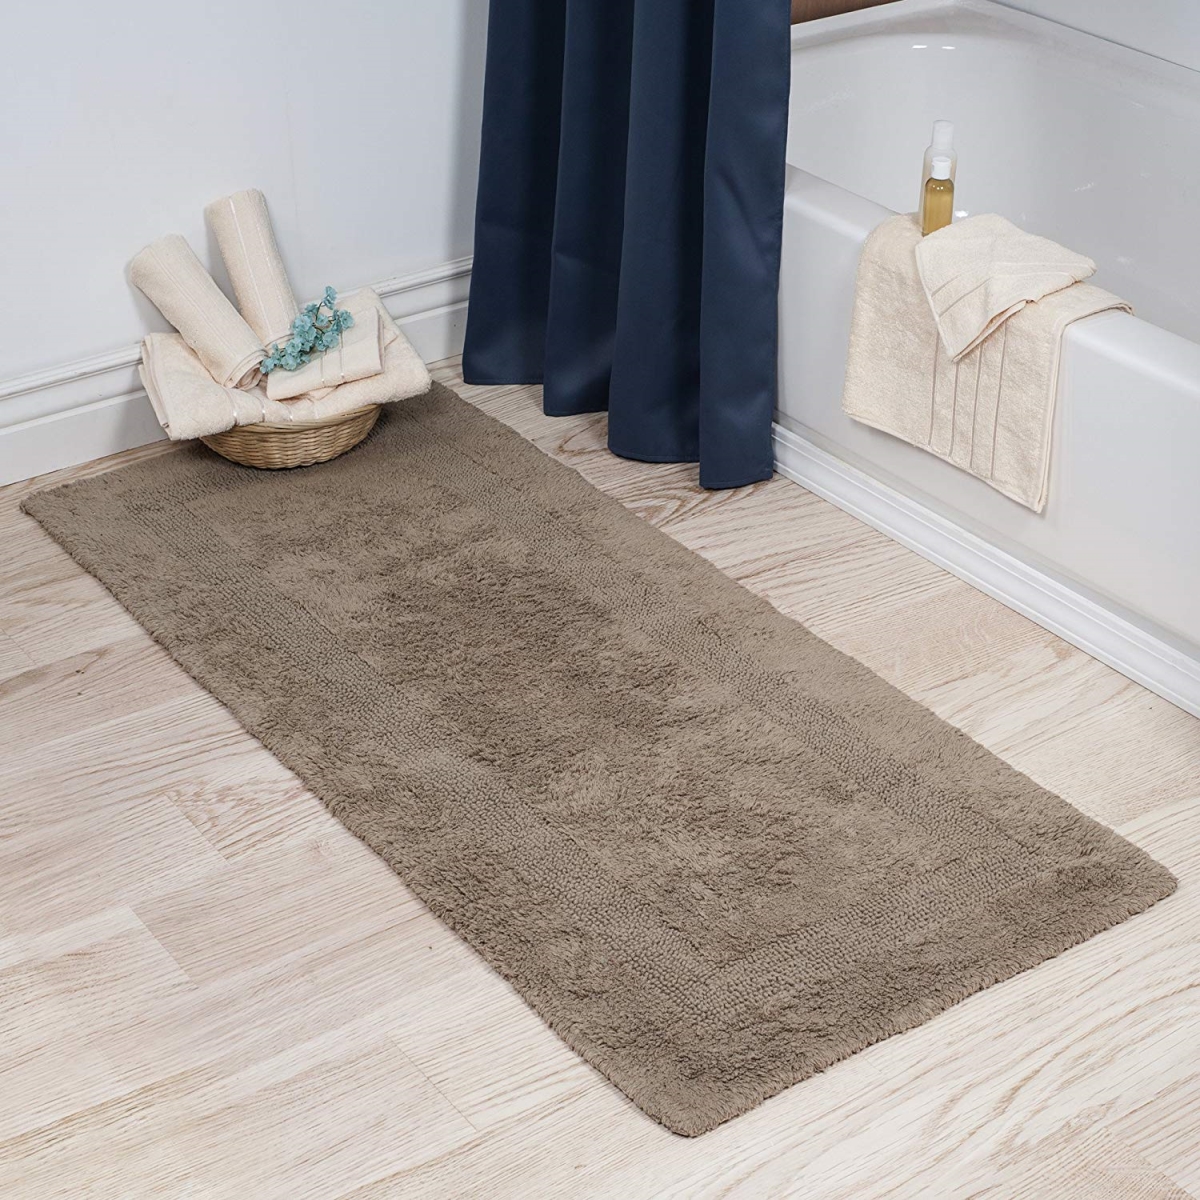 Picture of Bedford Home 67A-01561 100 Percent Cotton Reversible Long Bath Rug - Taupe - 24 x 60 in.